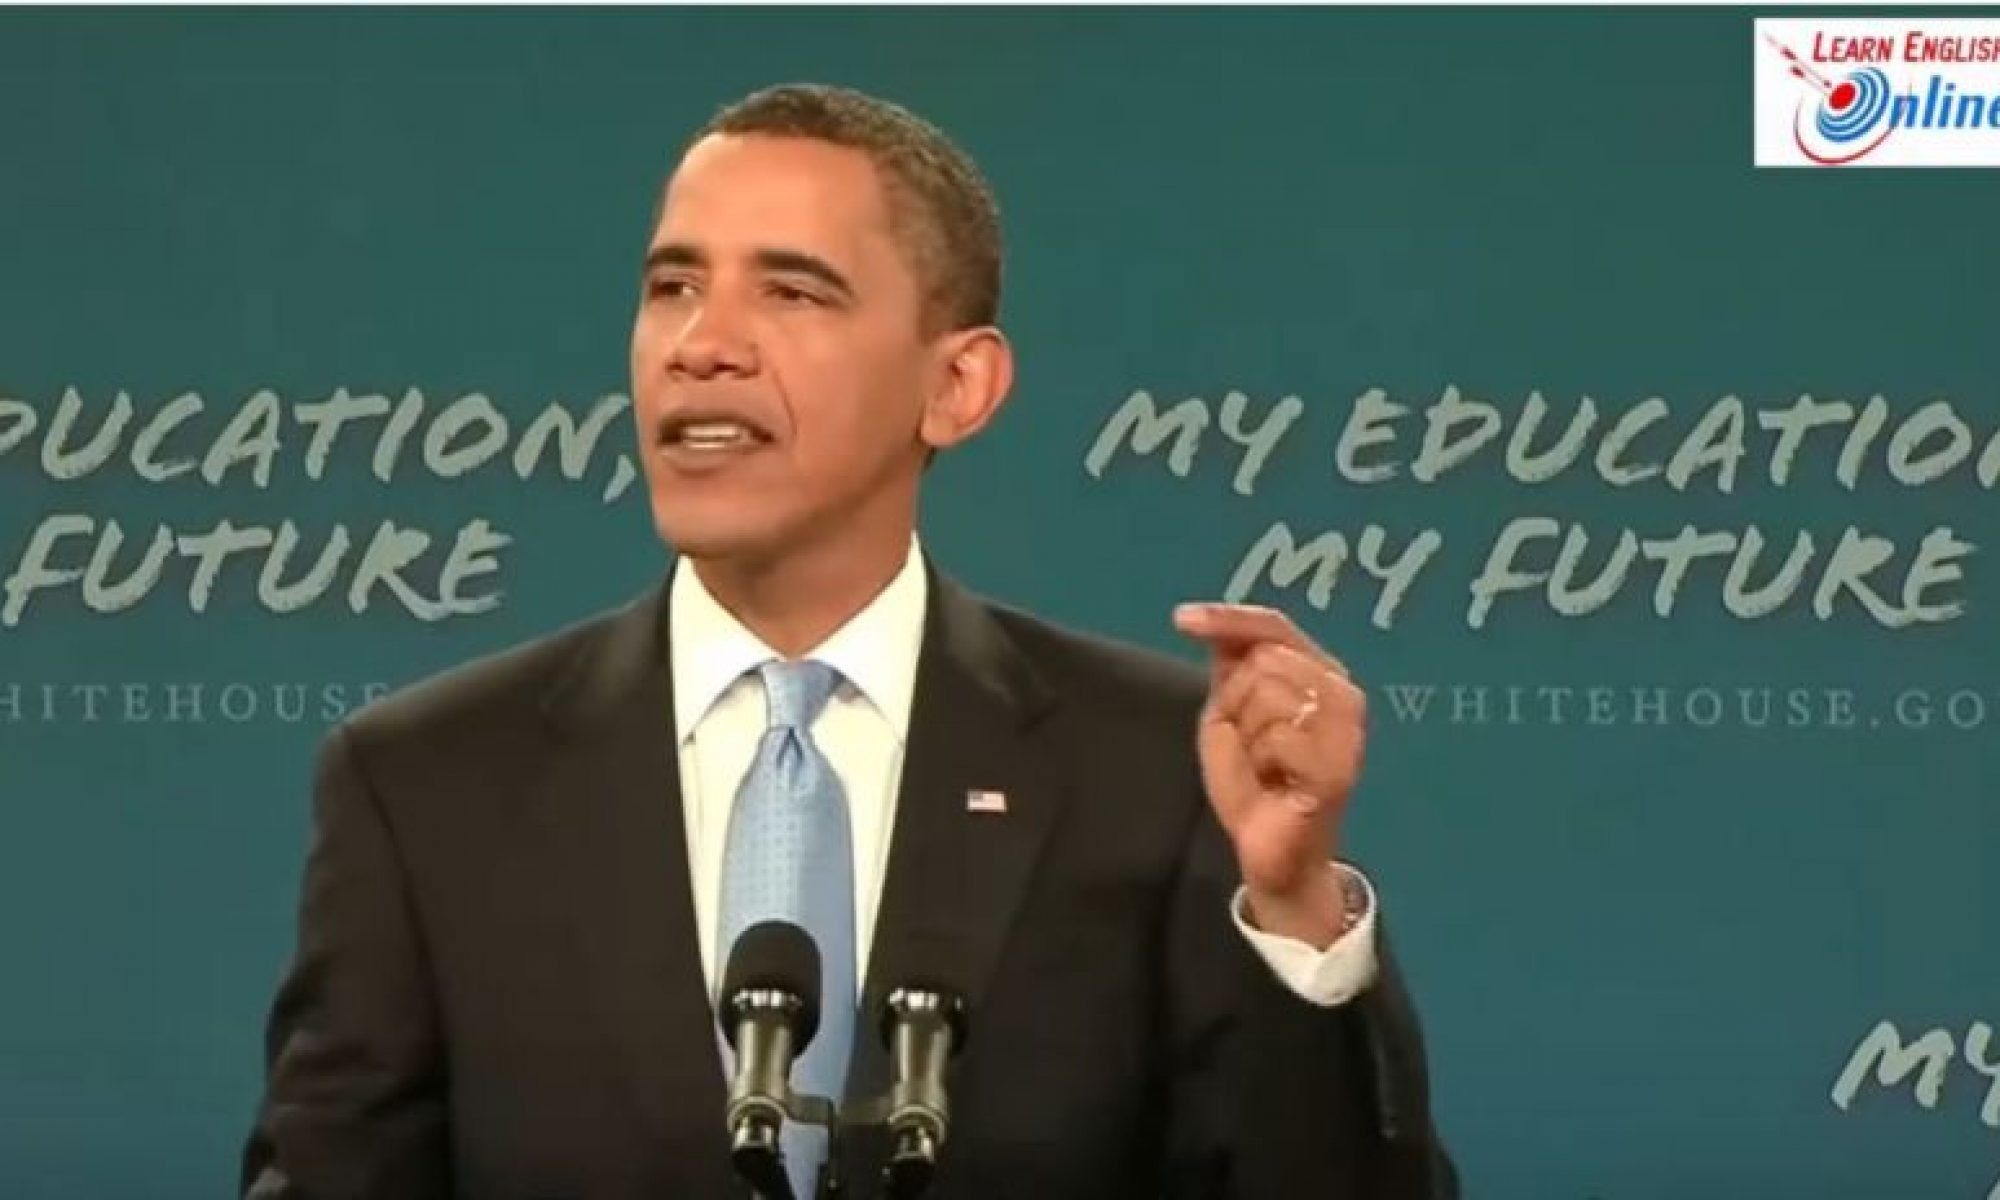 President Obama's Message for America's Student